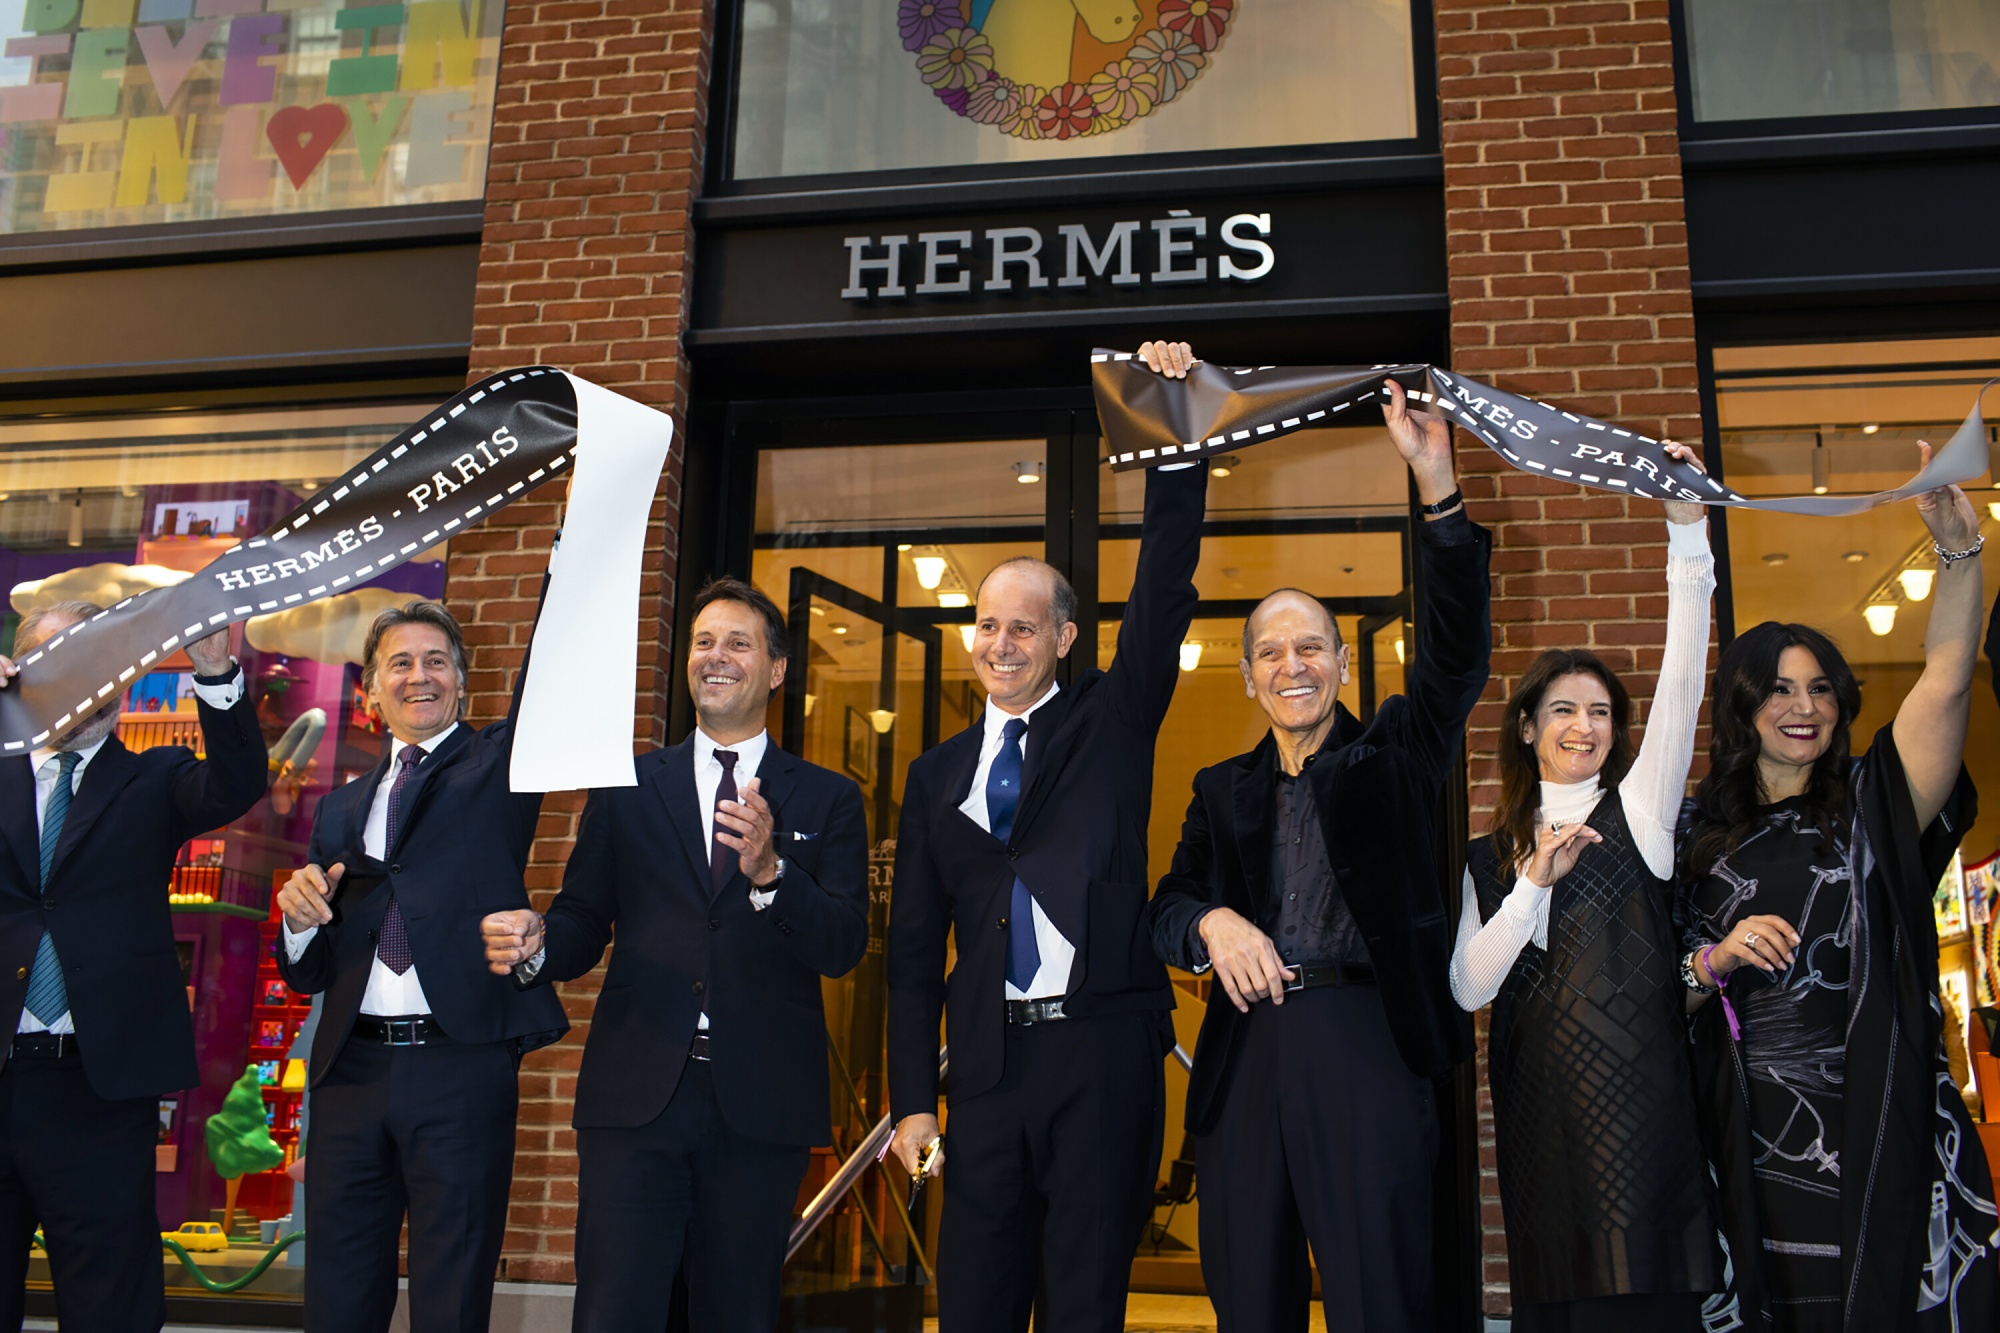 Pierre-Alexis Dumas, center, the brand's artistic director and the great-great-great grandson of Thierry Hermès, who founded the company in 1837, at the opening of the new Hermès flagship store in Manhattan, Sept. 29, 2022. (Landon Nordeman/The New York